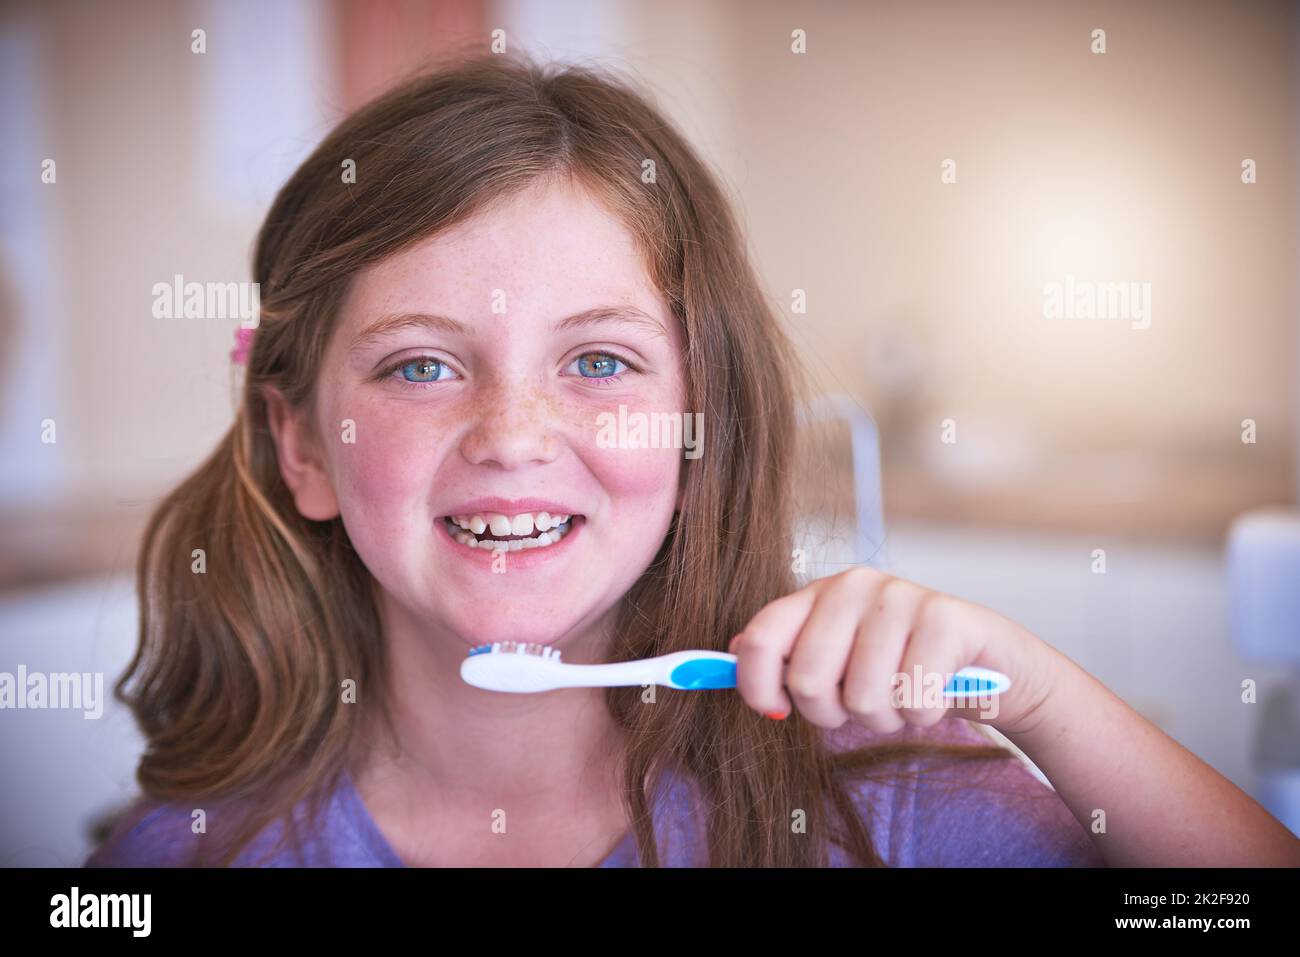 Making sure my pearly whites stay pearly. Cropped shot of a little girl brushing her teeth. Stock Photo